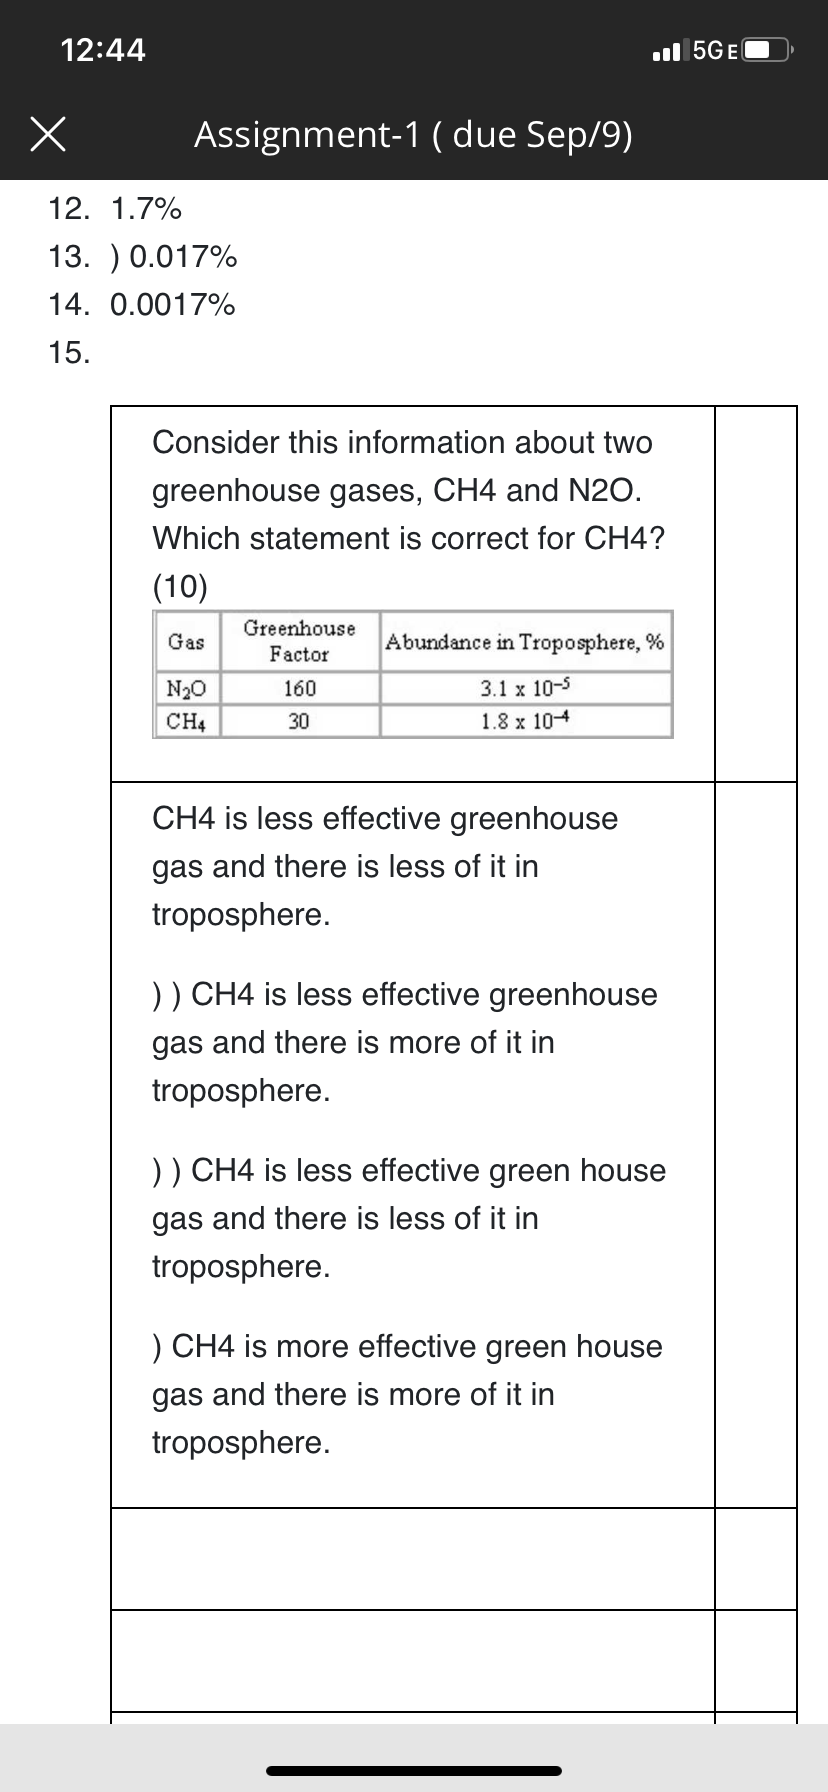 Consider this information about two
greenhouse gases, CH4 and N2O.
Which statement is correct for CH4?
(10)
Greenhouse
Gas
Abundance in Troposphere, %
Factor
N20
160
3.1 x 10-5
CH4
30
1.8 x 104
CH4 is less effective greenhouse
gas and there is less of it in
troposphere.
)) CH4 is less effective greenhouse
gas and there is more of it in
troposphere.
)) CH4 is less effective green house
gas and there is less of it in
troposphere.
) CH4 is more effective green house
gas and there is more of it in
troposphere.
